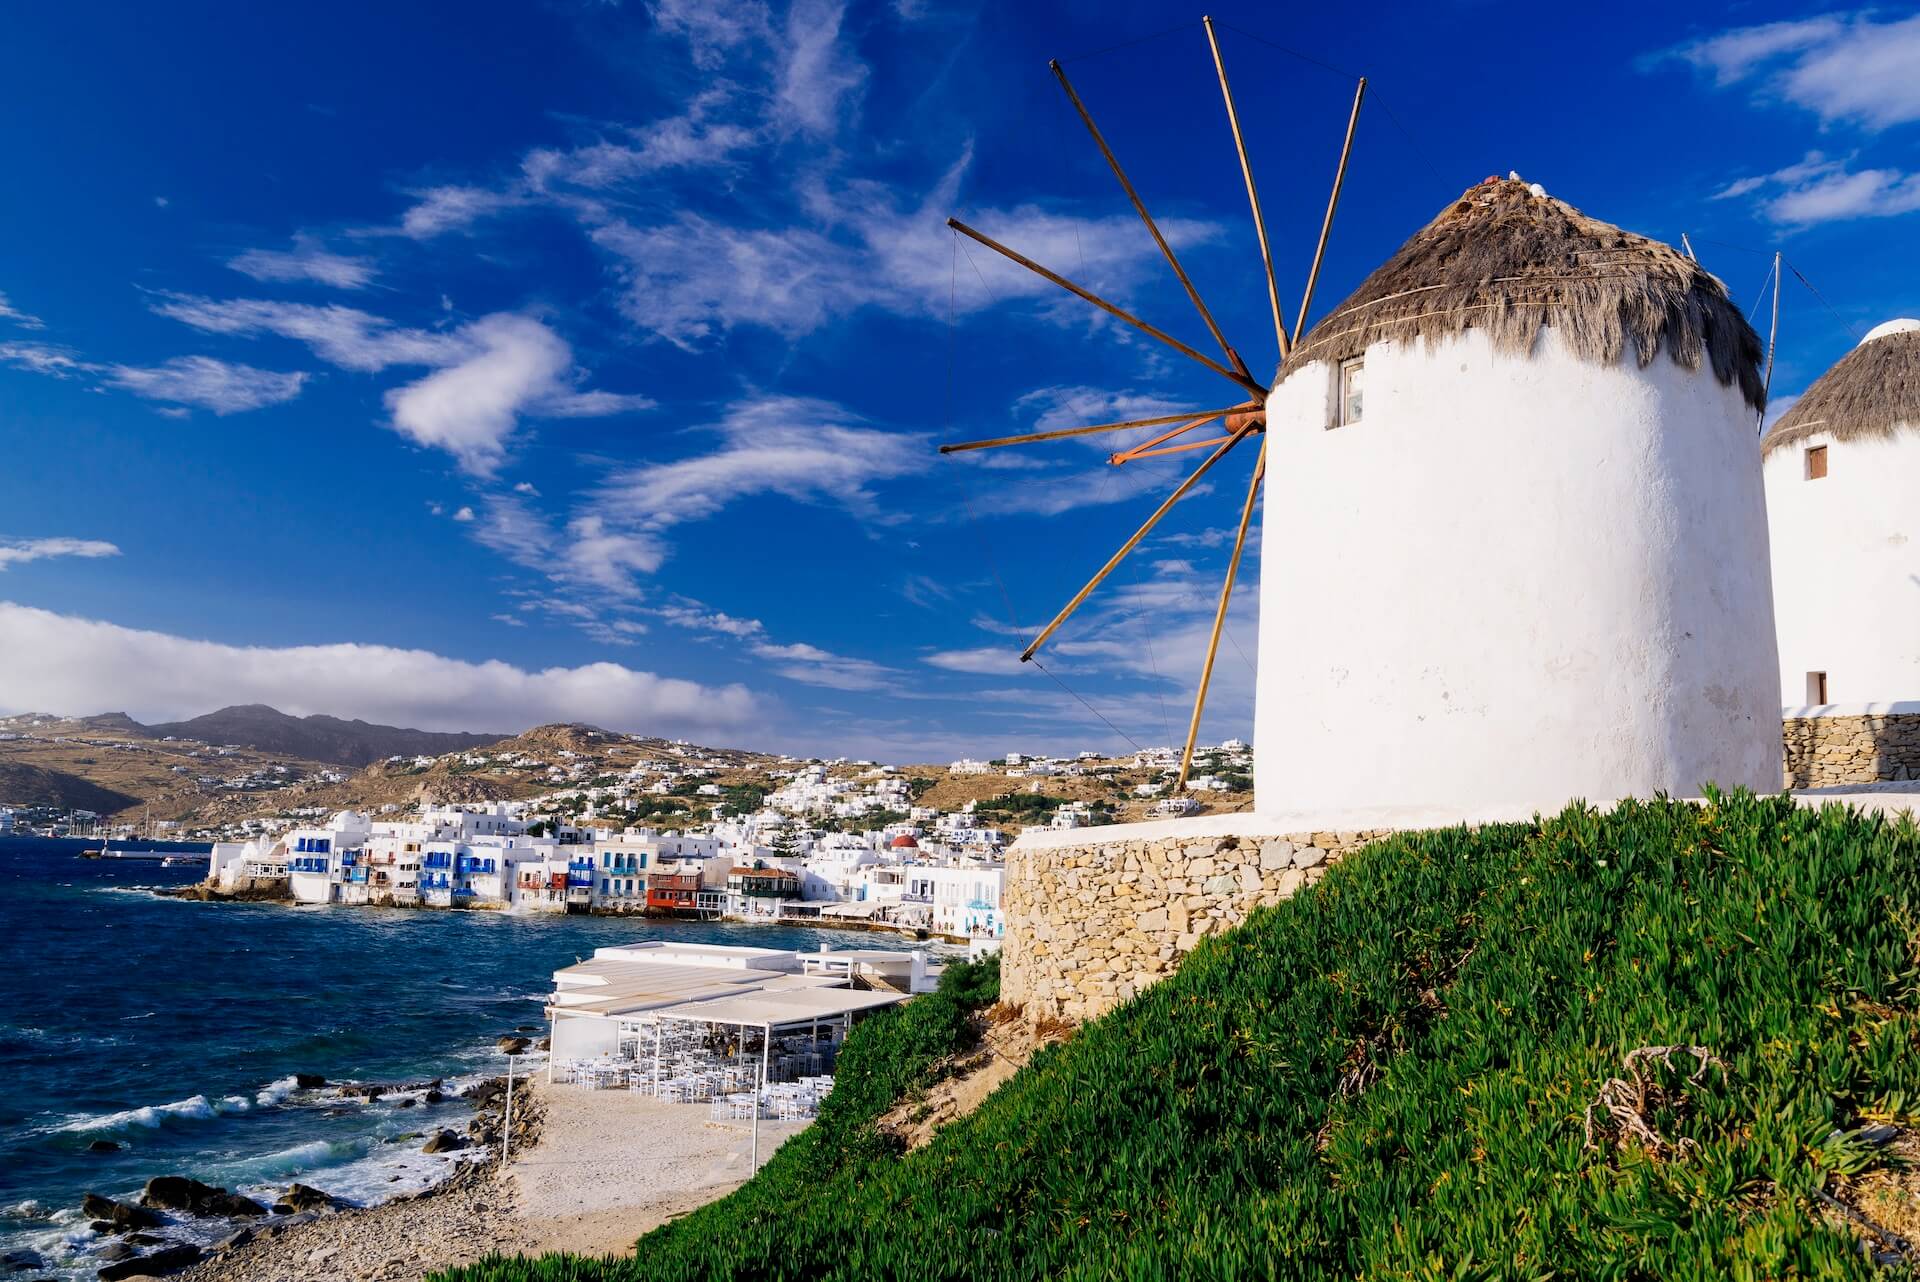 Windmills on the right and a view of Mykonos town on the left